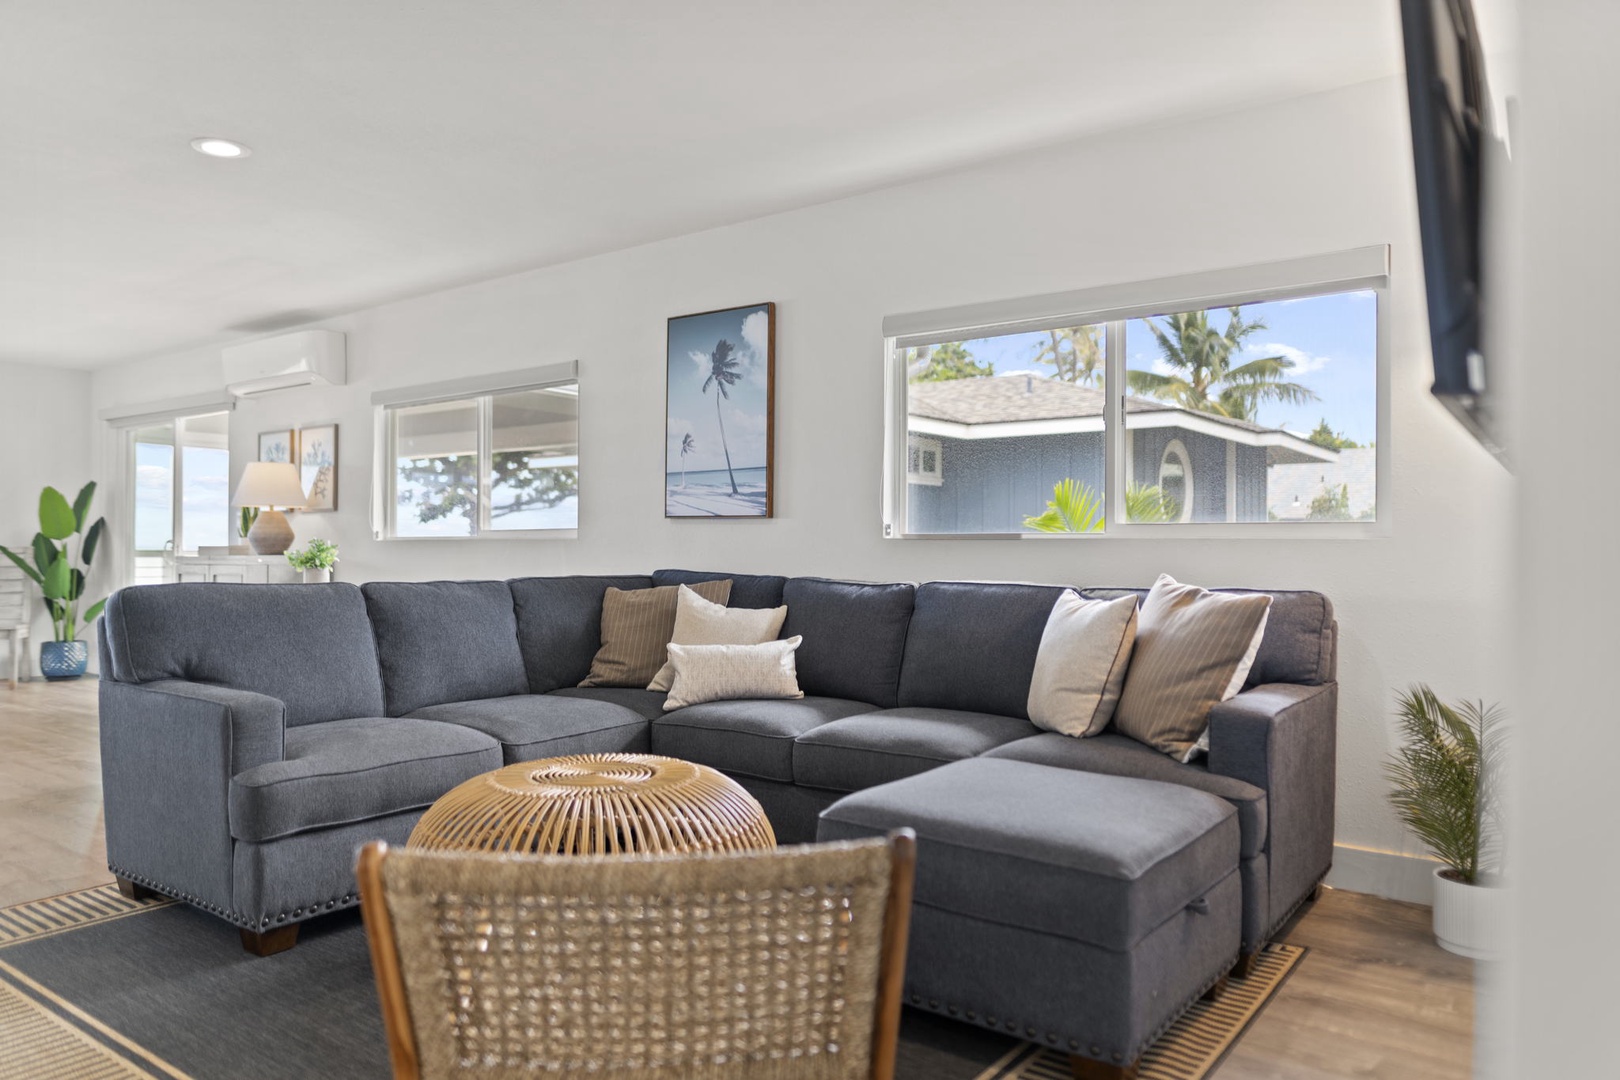 Haleiwa Vacation Rentals, Hale Nalu - The living area drenched in natural lights